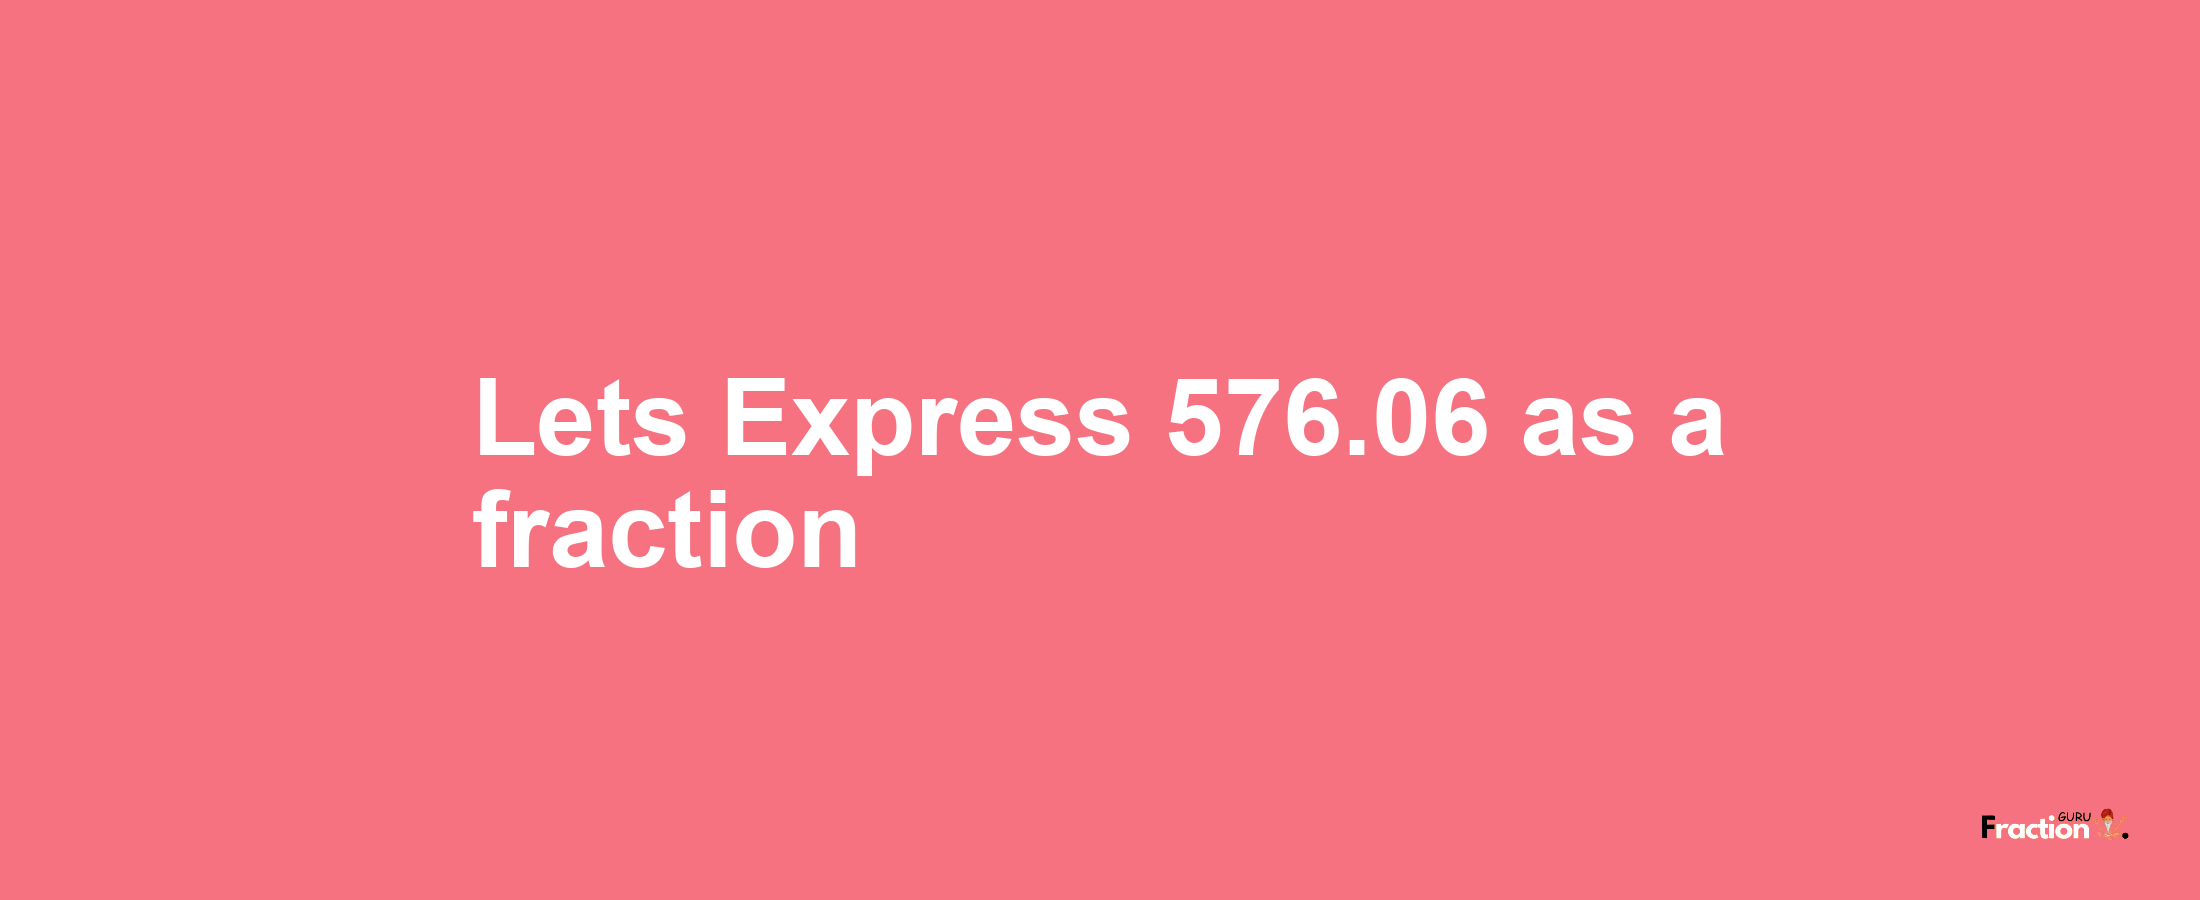 Lets Express 576.06 as afraction